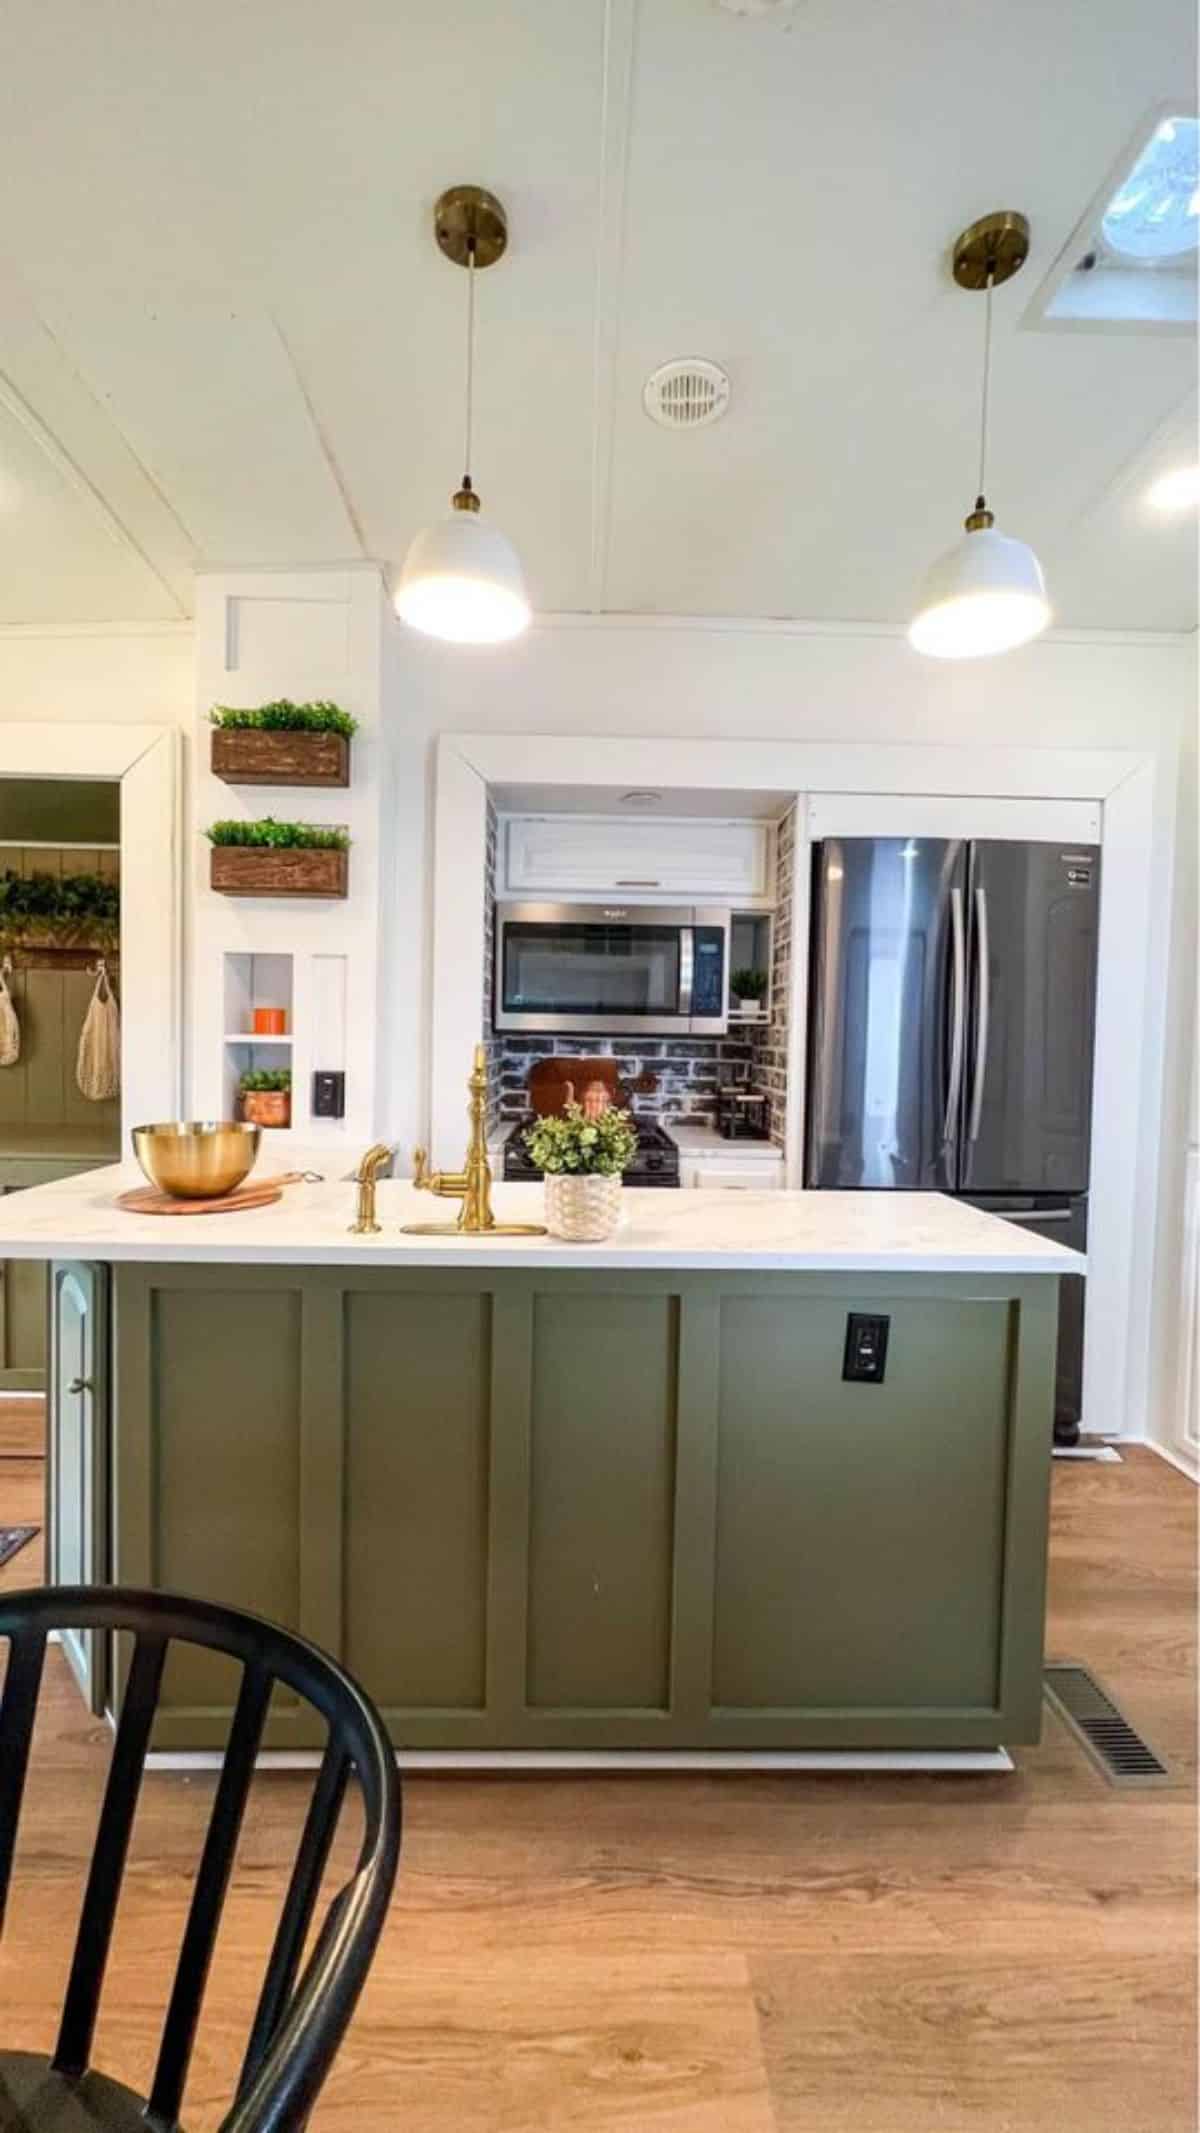 Well organized kitchen of 40' Tiny House has a double door refrigerator, an oven and brand new countertop